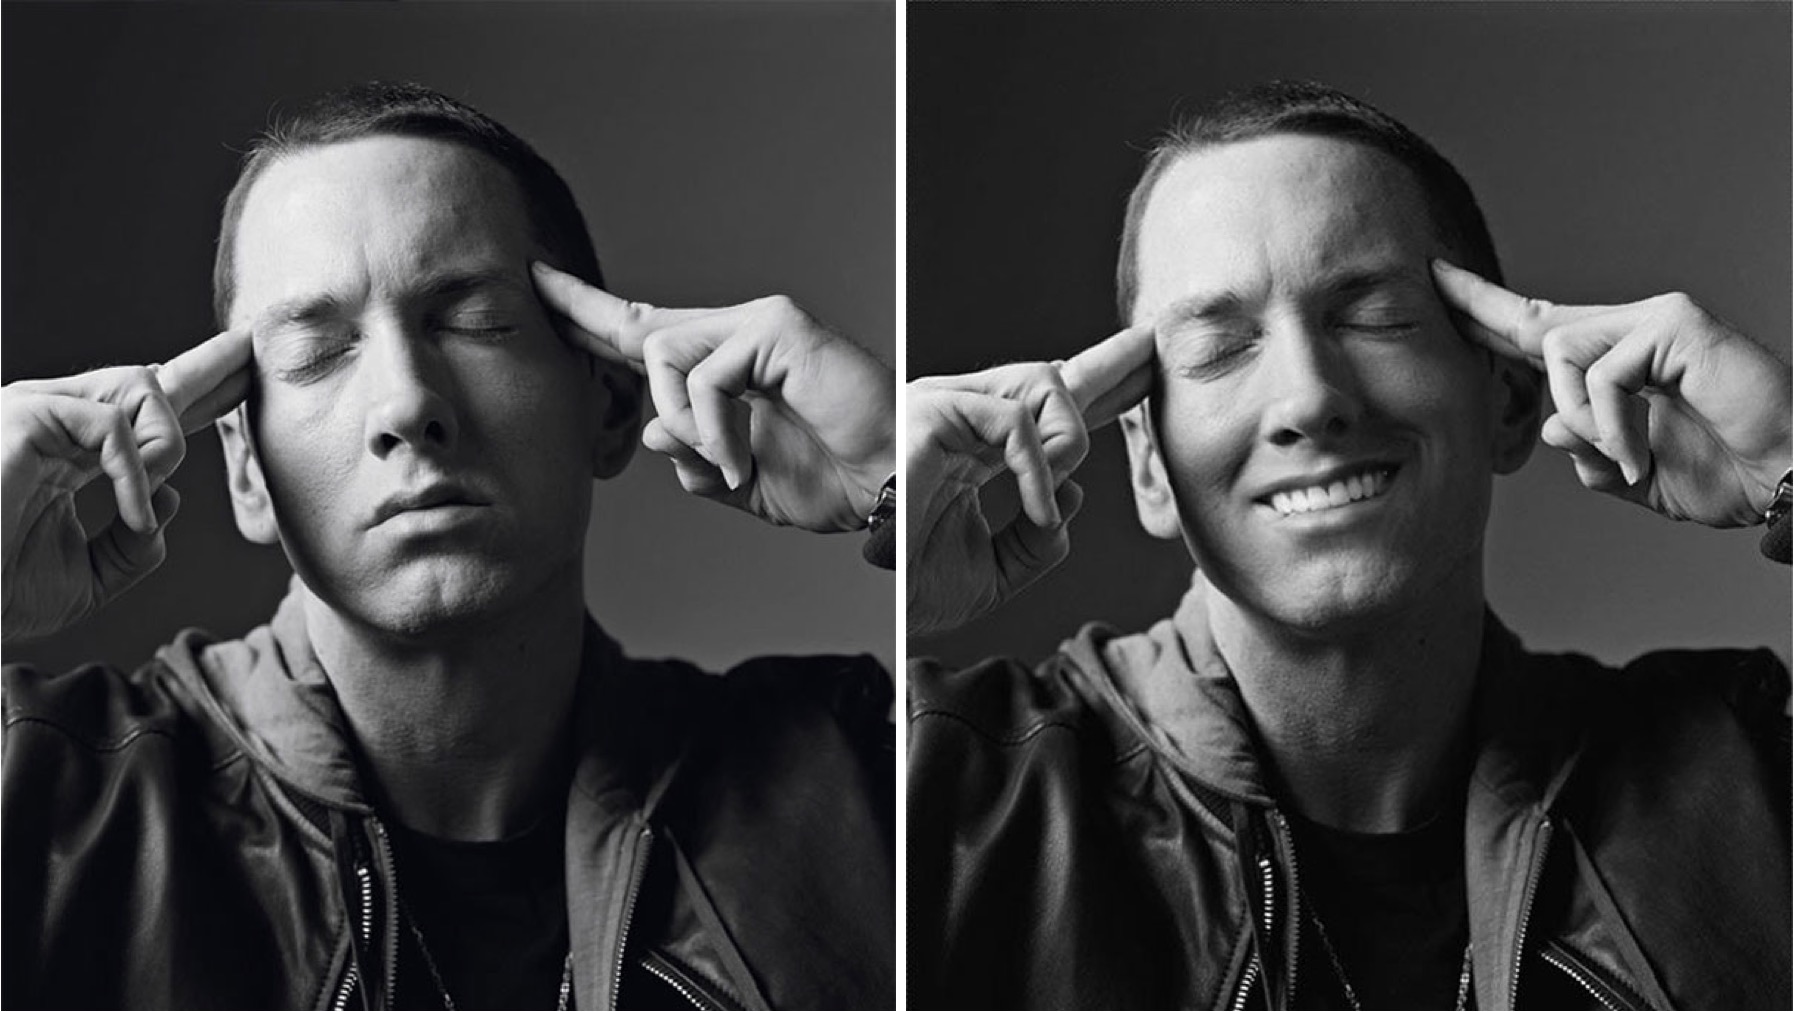 This Guy Is Forcing Eminem to Smile With Photoshop